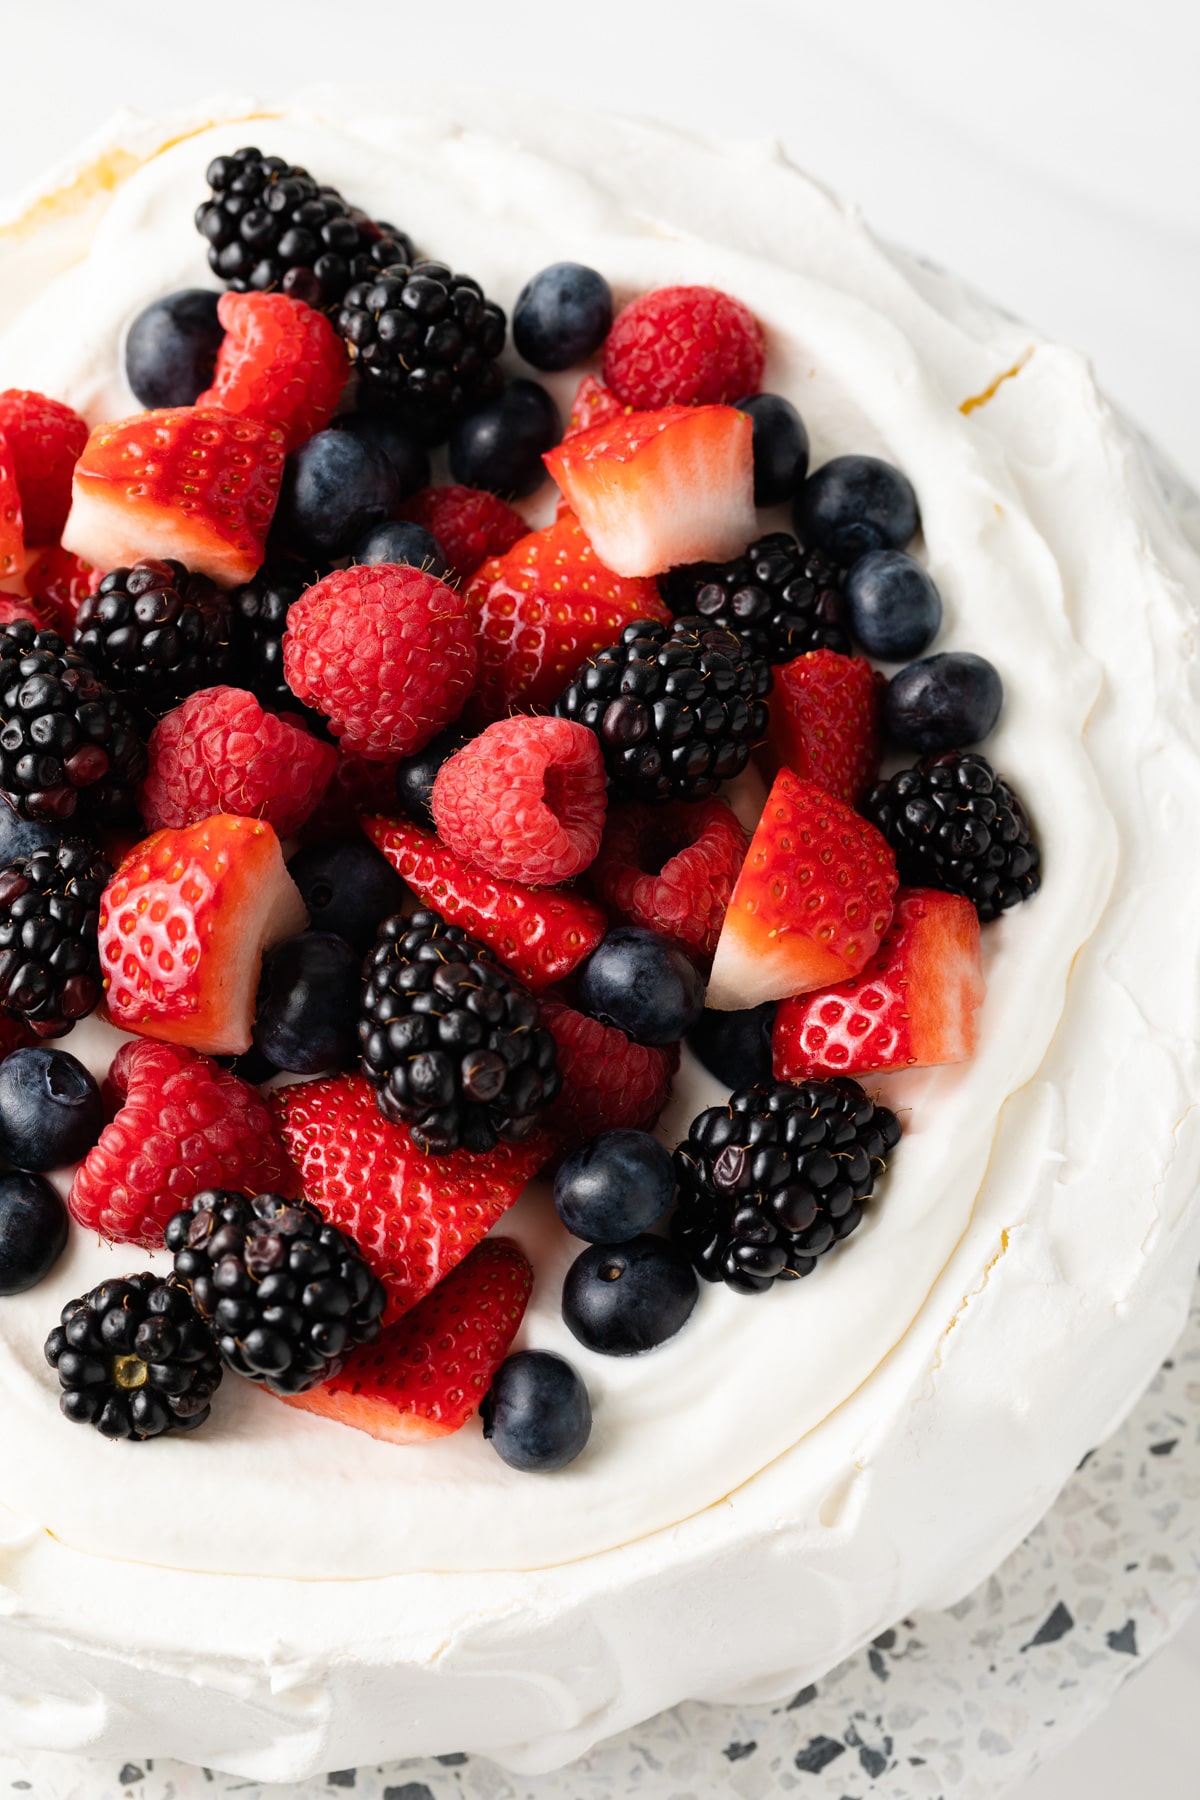 Pavlova topped with whipped cream and berries.